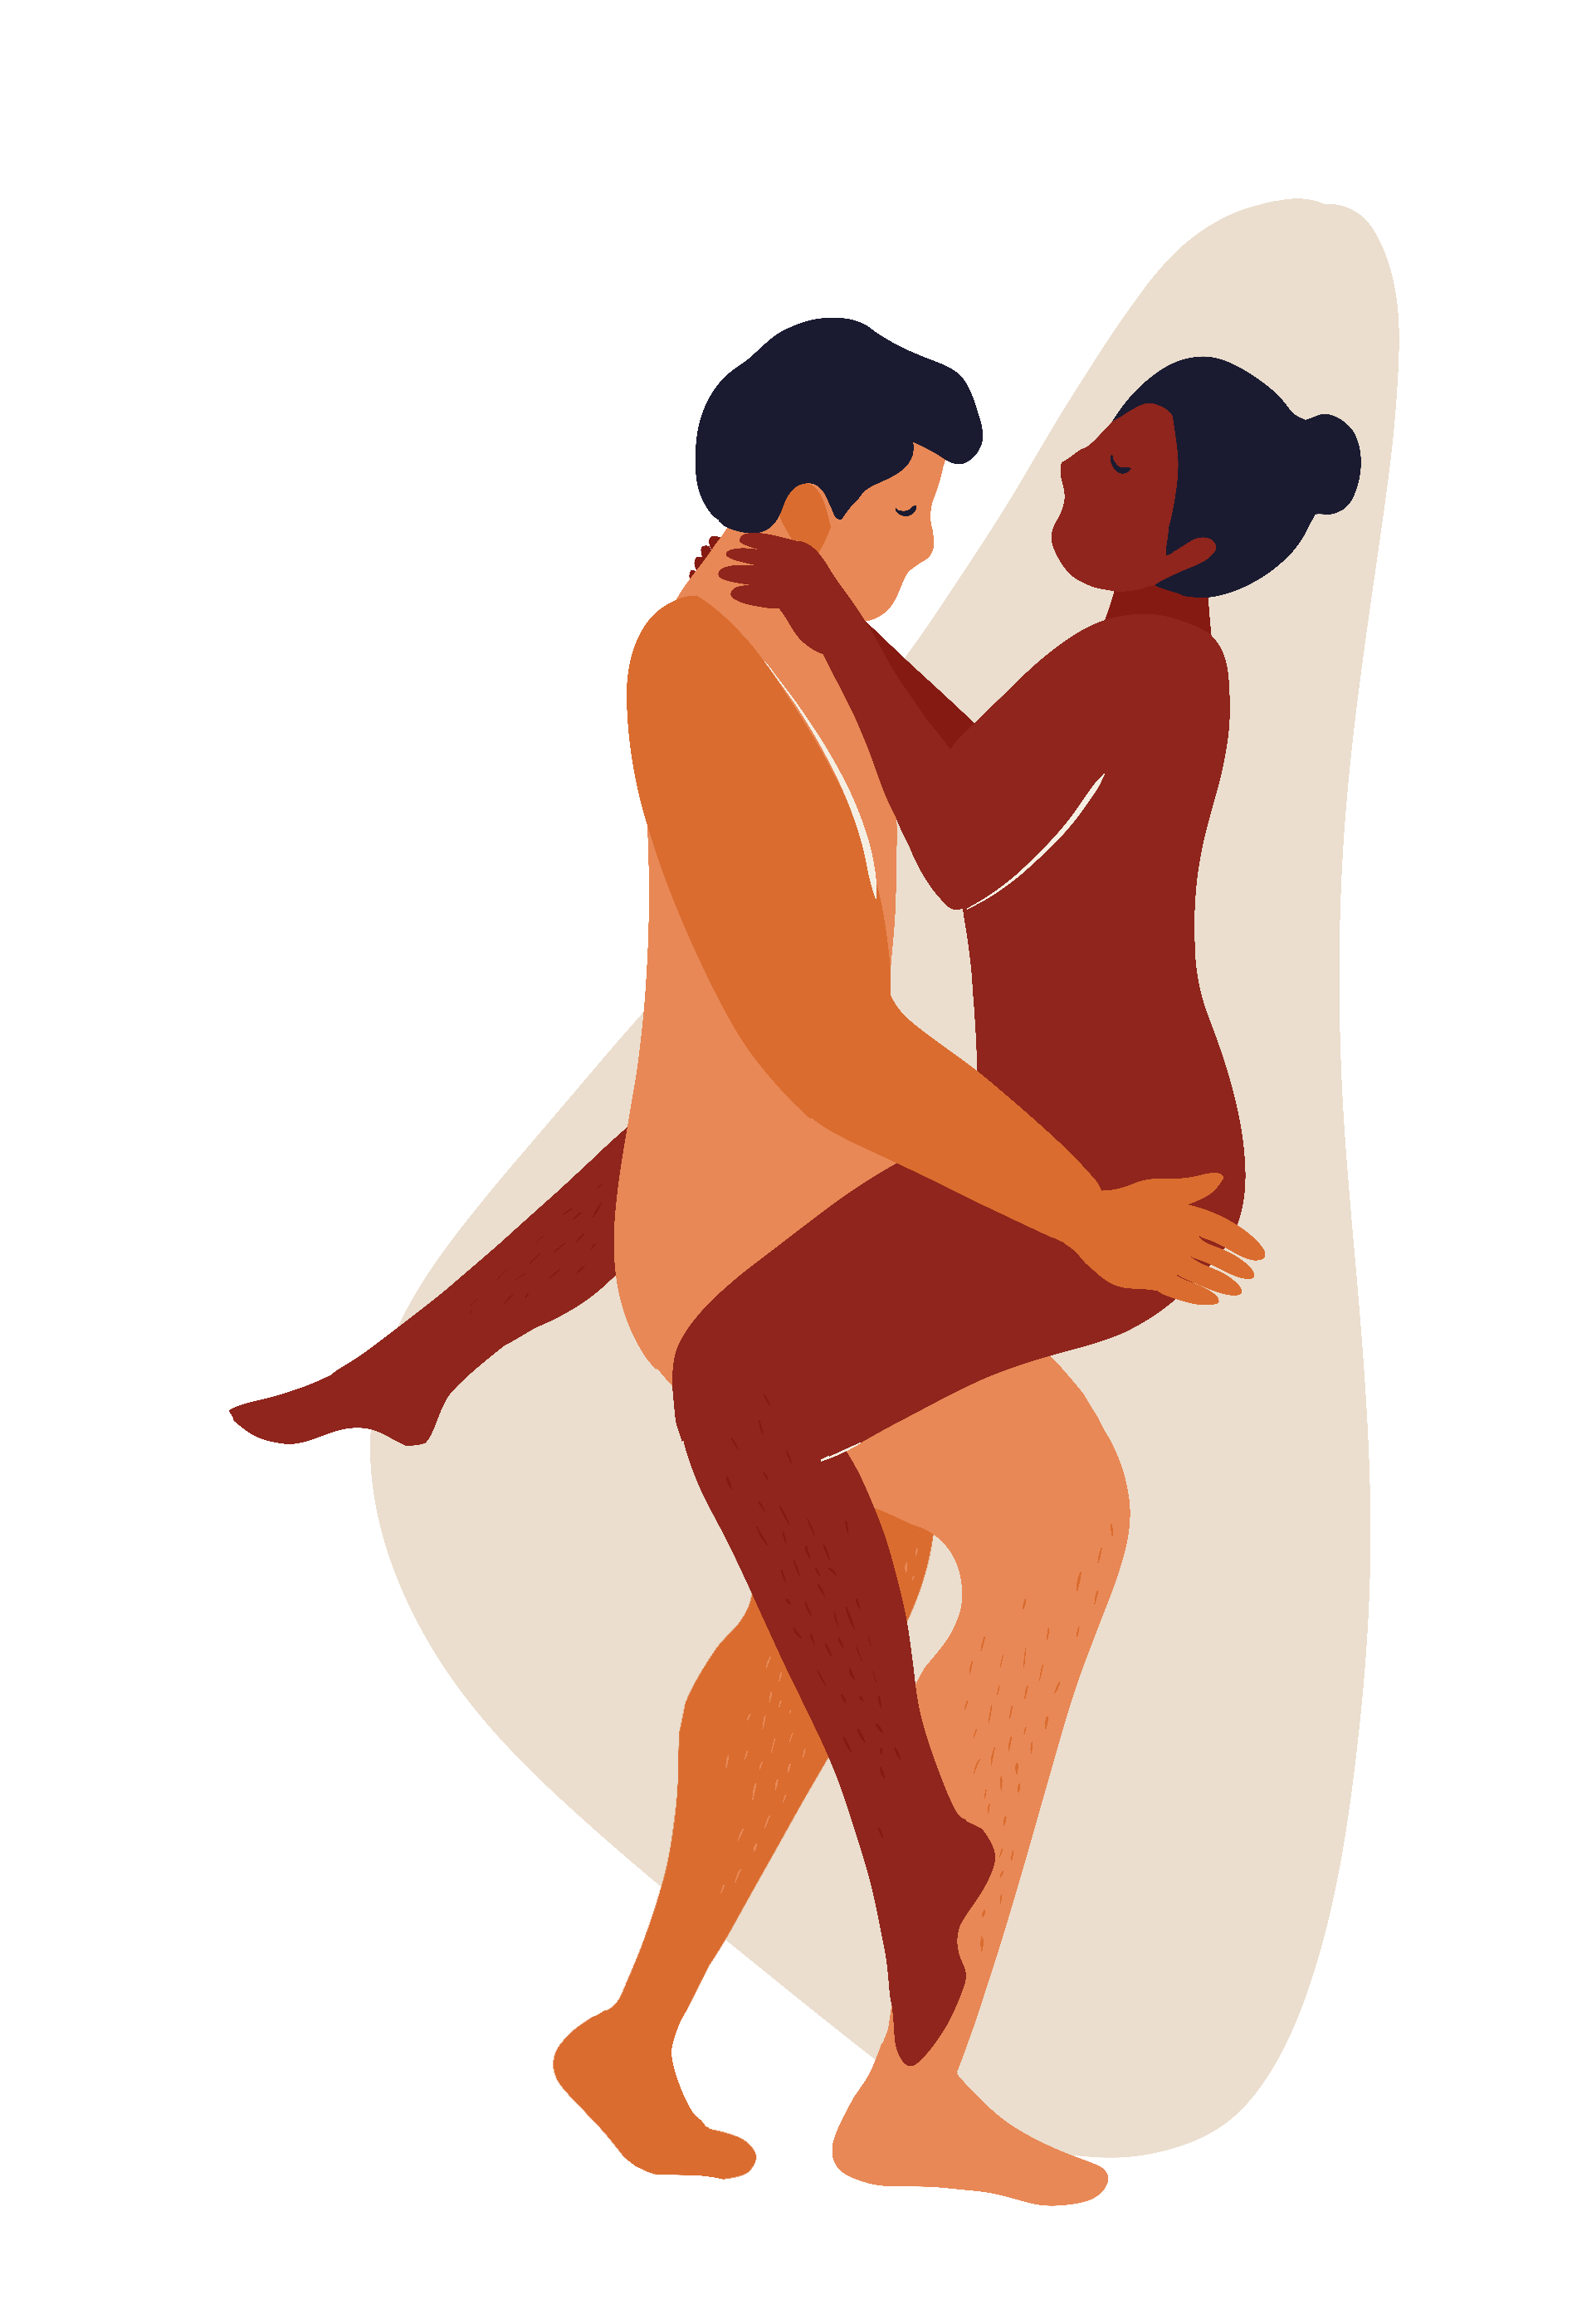 15 Kama Sutra Sex Positions That Couples Can Easily Pull hq nude image